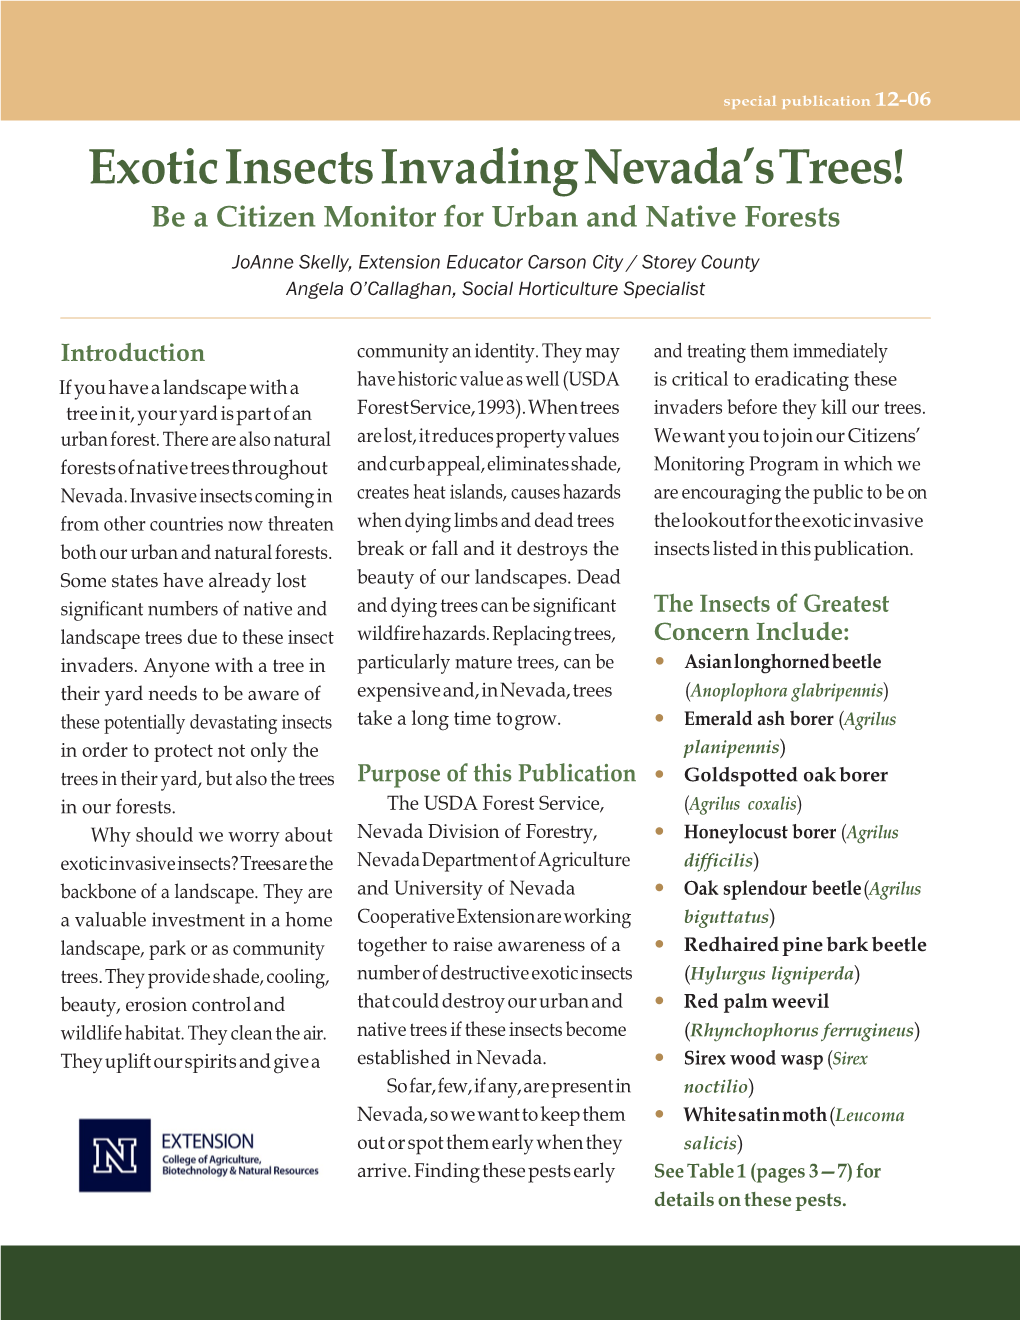 Exotic Insects Invading Nevada's Trees!